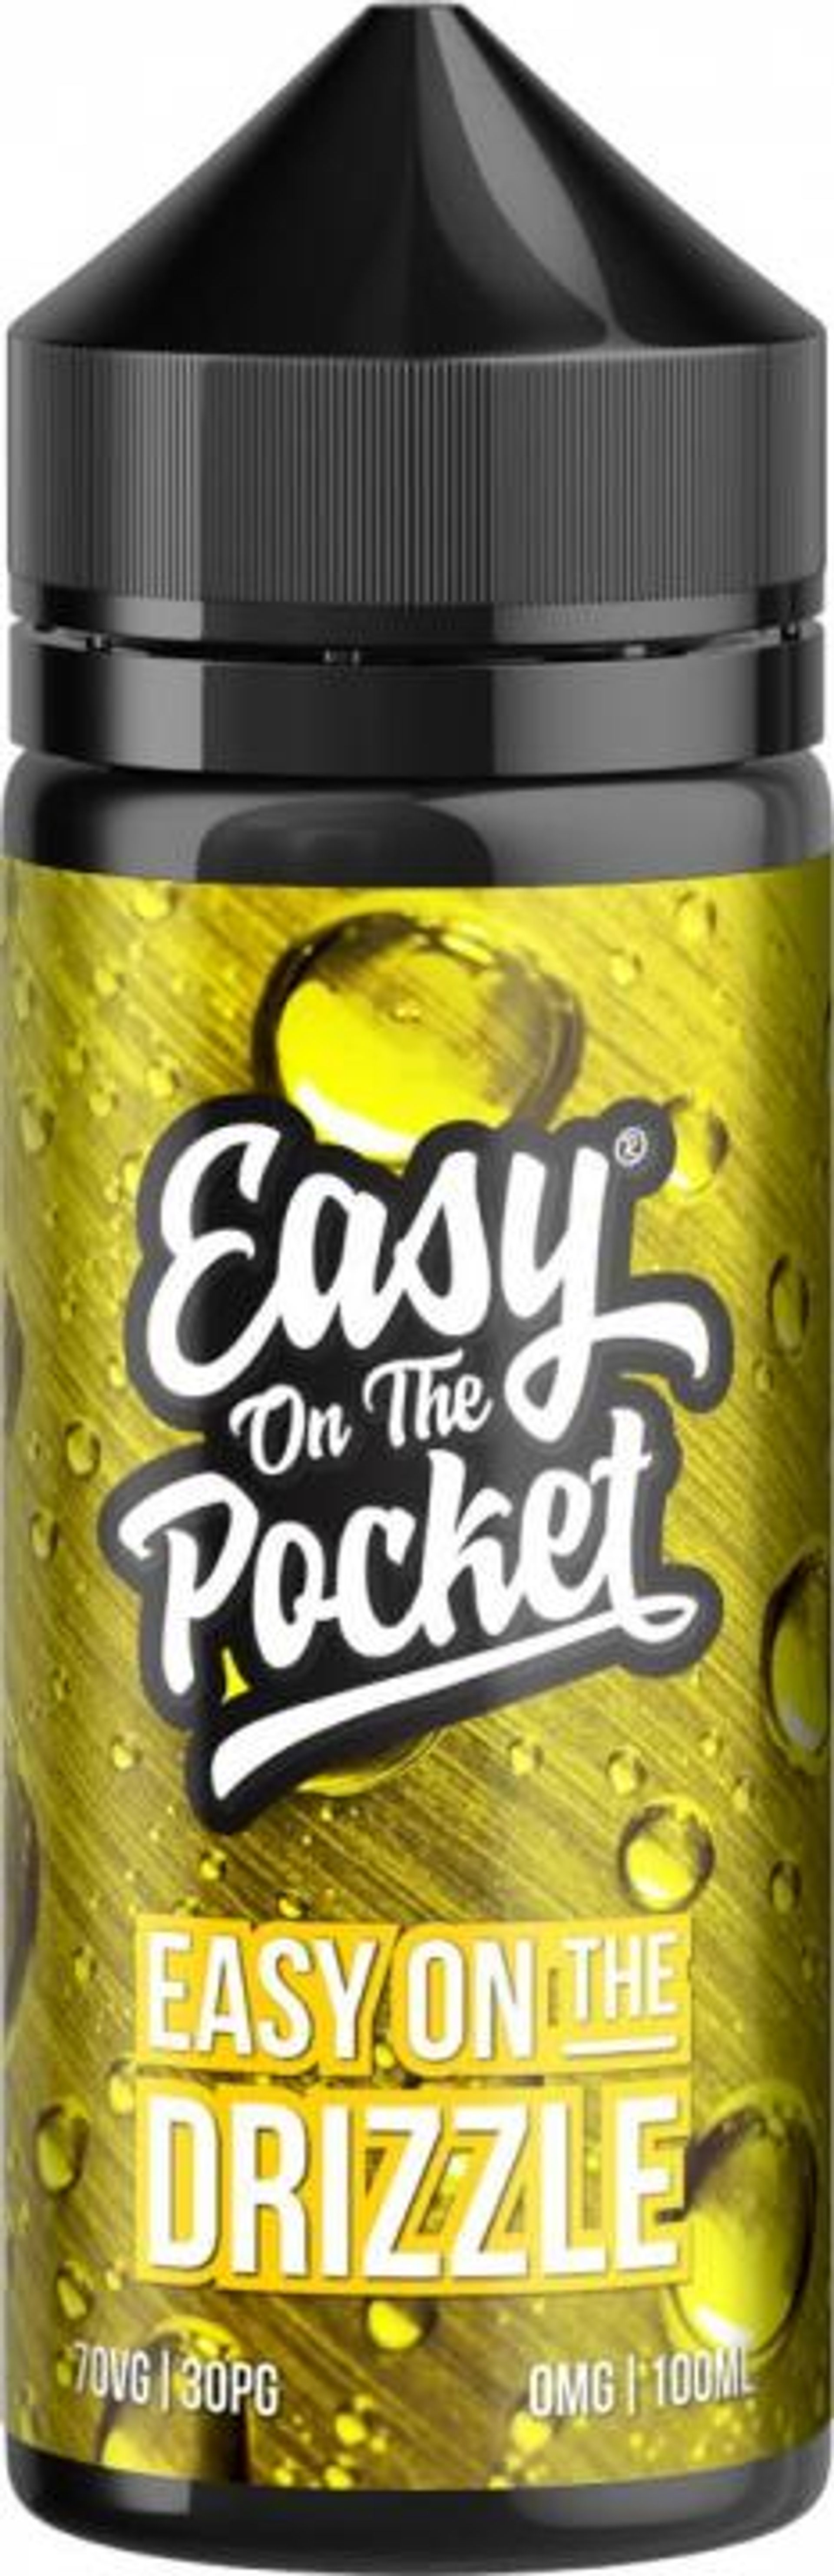 Image of Easy On The Drizzle by Easy On The Pocket